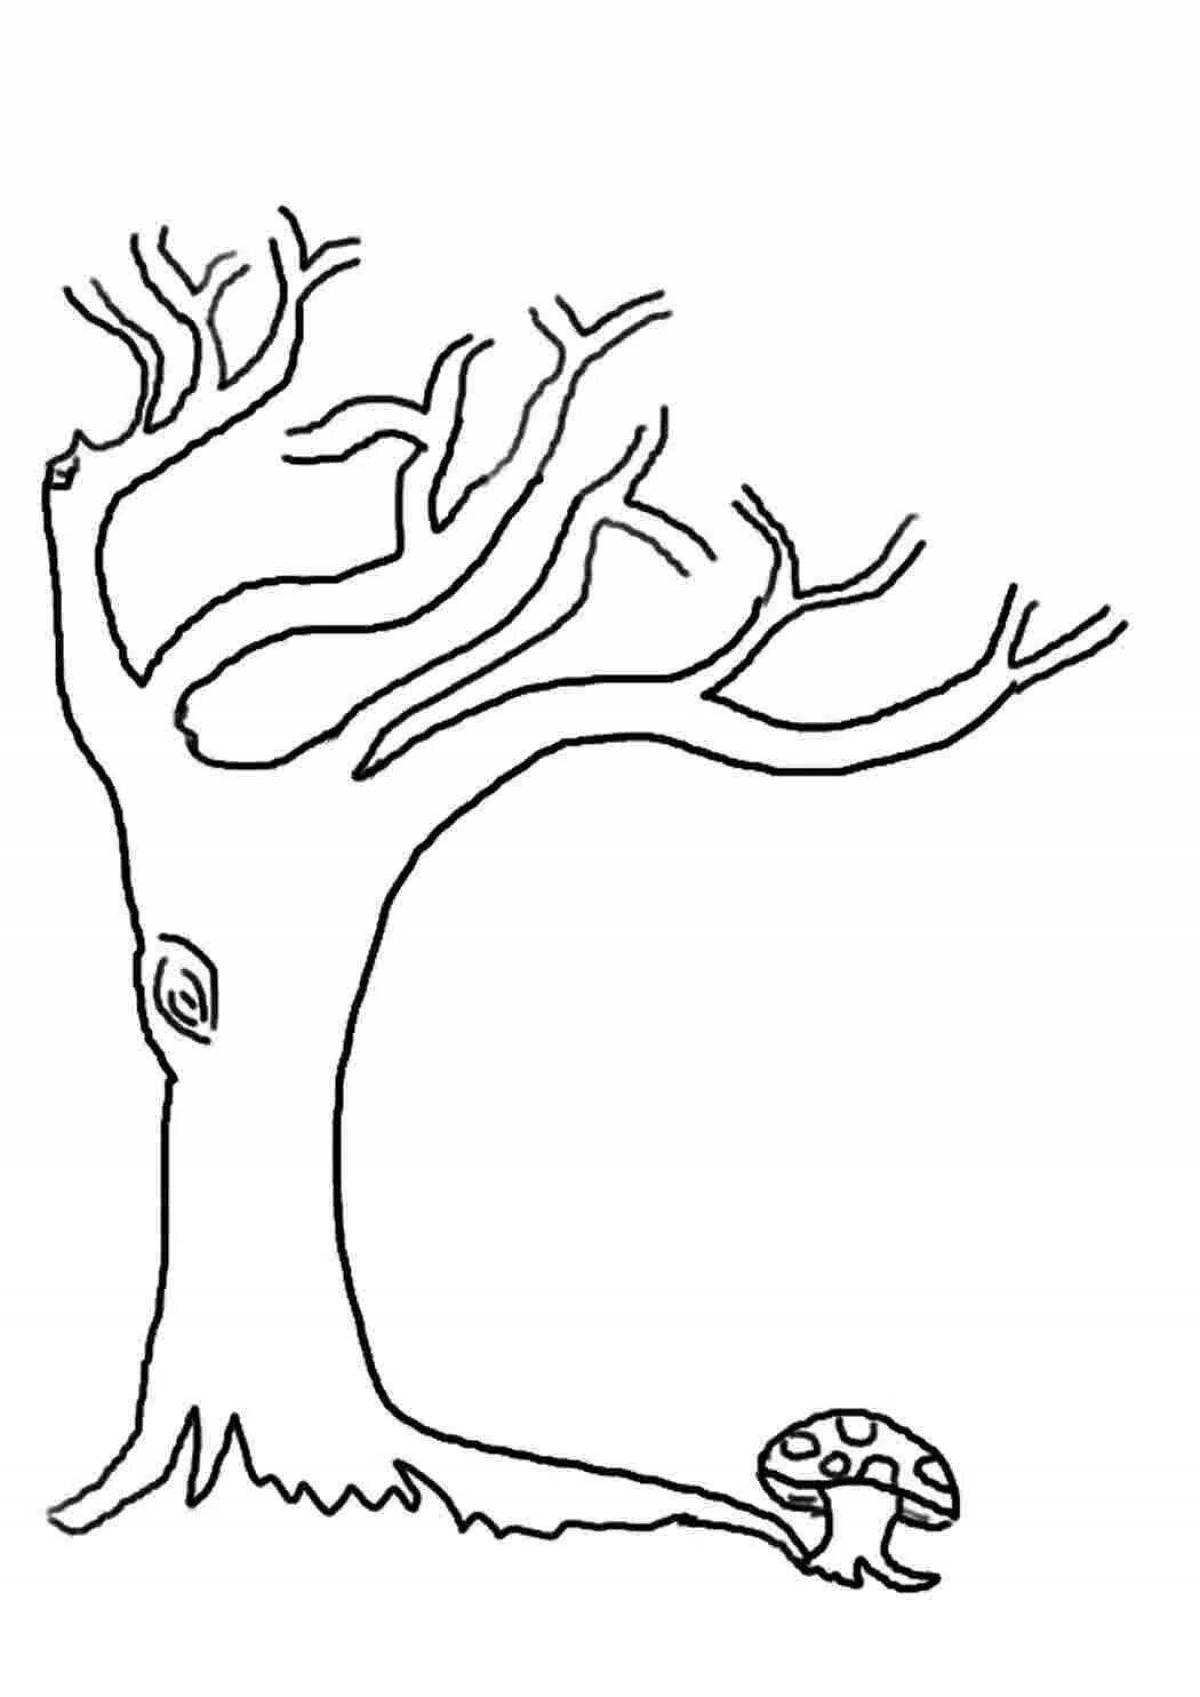 Playful tree trunk coloring page for toddlers